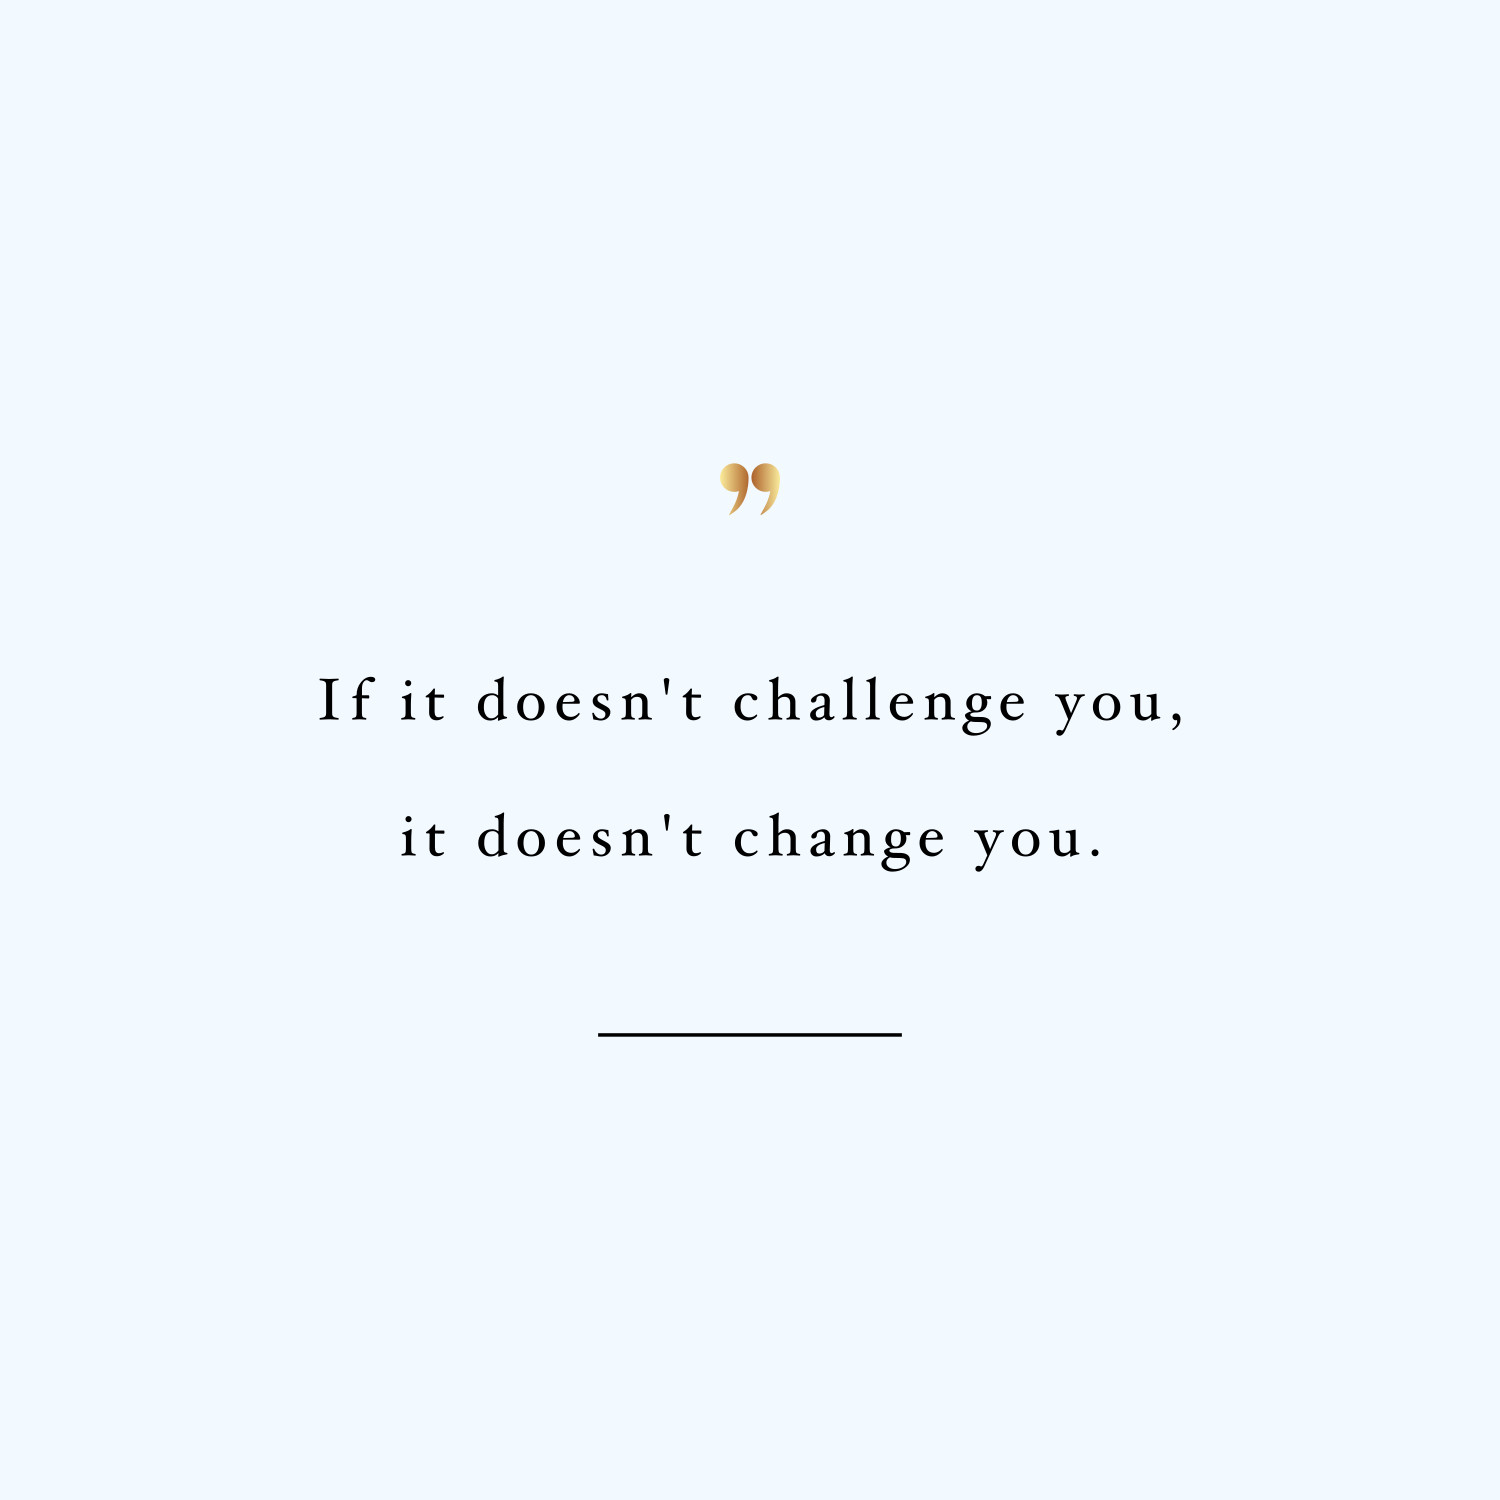 Challenge yourself! Browse our collection of motivational fitness quotes and get instant training and workout inspiration. Stay focused and get fit, healthy and happy! https://www.spotebi.com/workout-motivation/workout-inspiration-challenge-yourself/